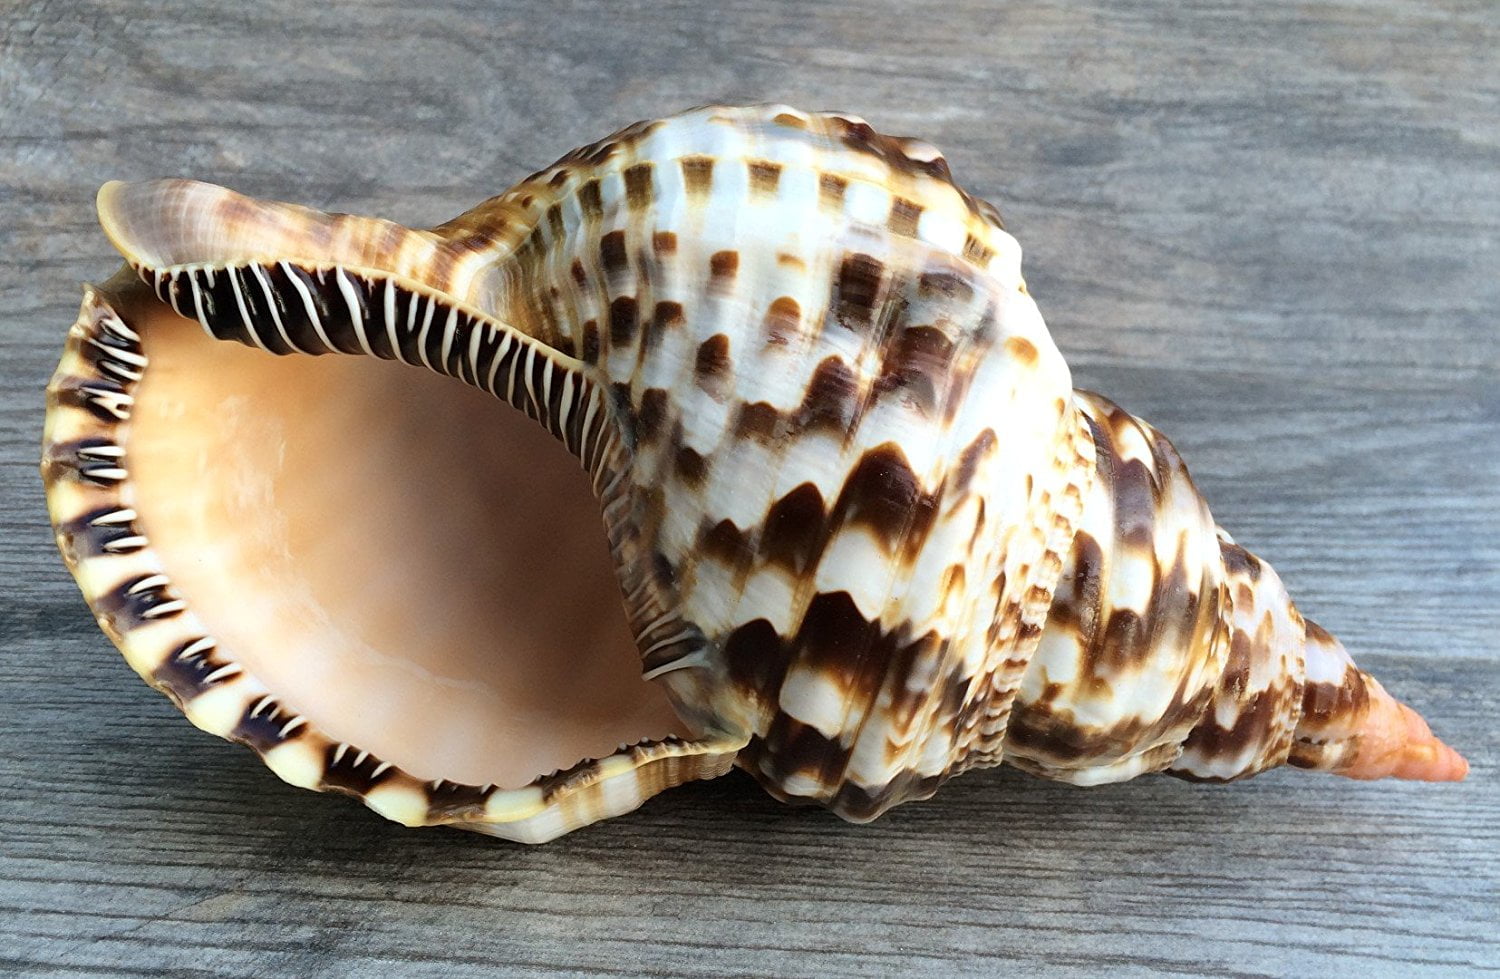 Whole Conch Shells Tan Cream Colors SS-110 Free 2 Day Shipping 3 to 4 inch Gift Seashell Collector